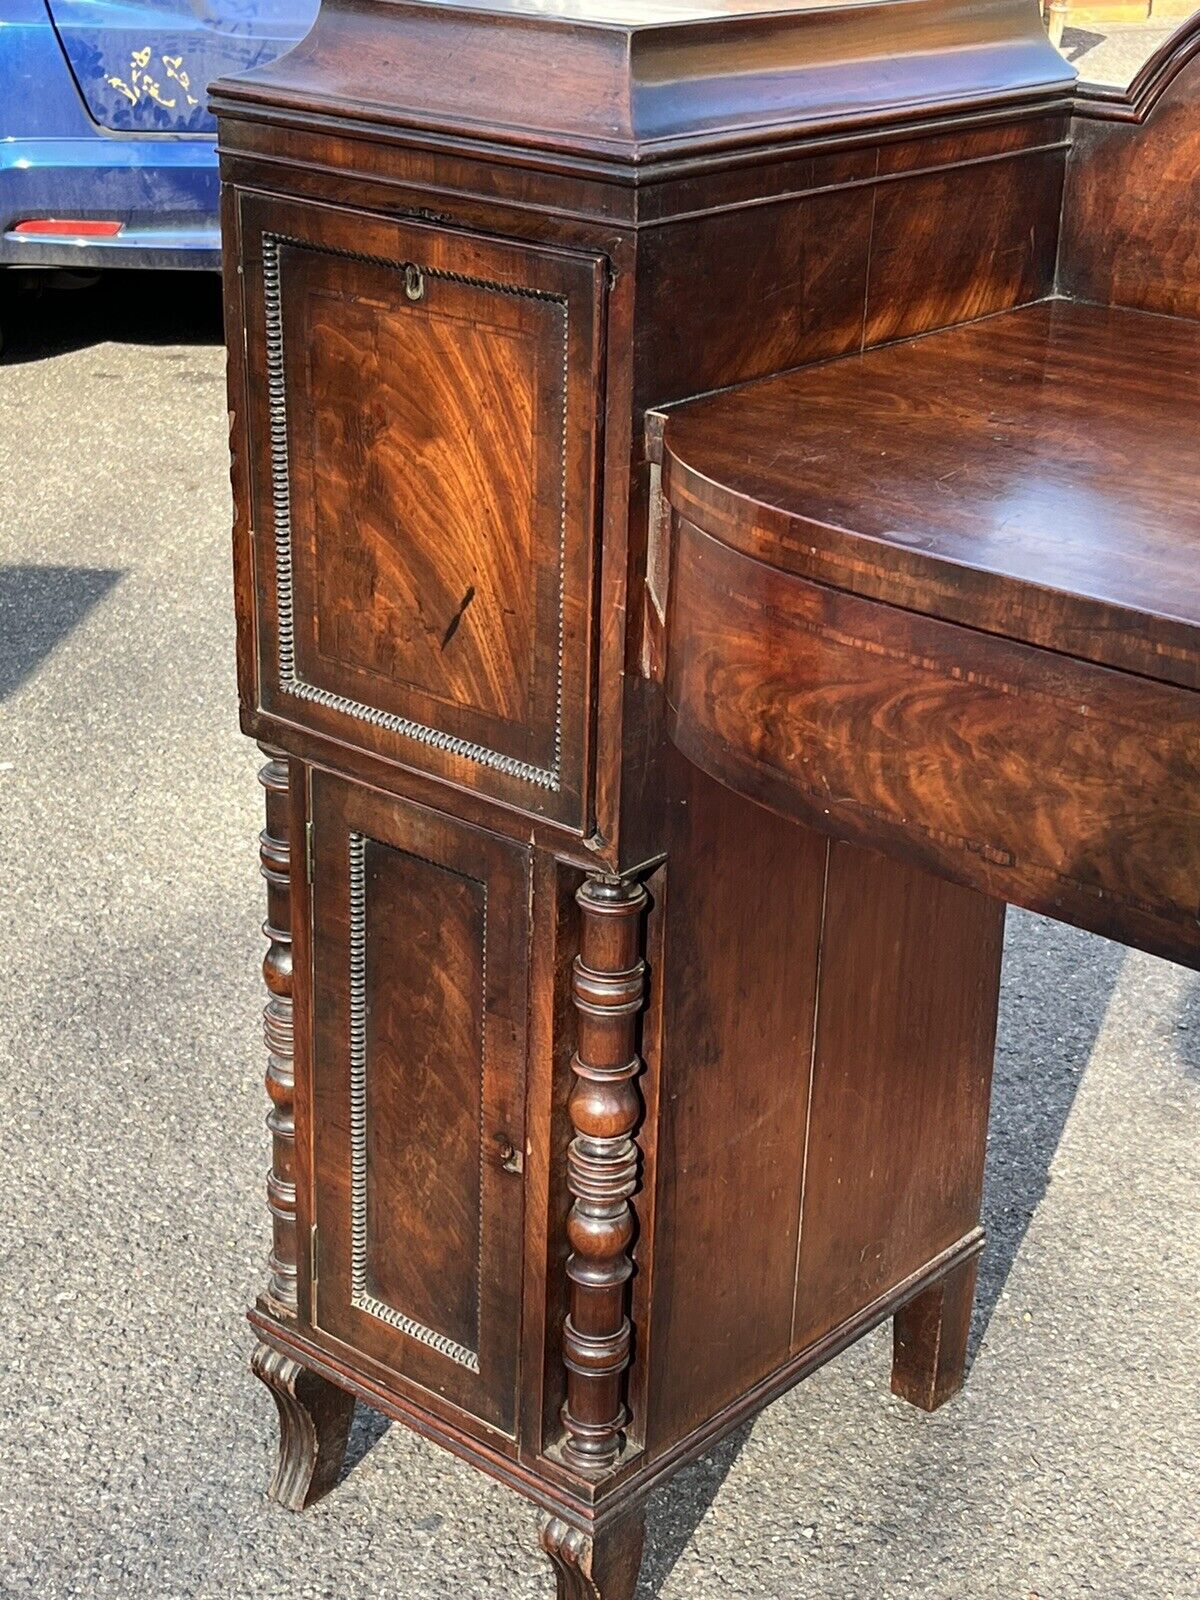 Antique Regency Mahogany Sideboard With Wine Cooler, Drawers & Cupboards.